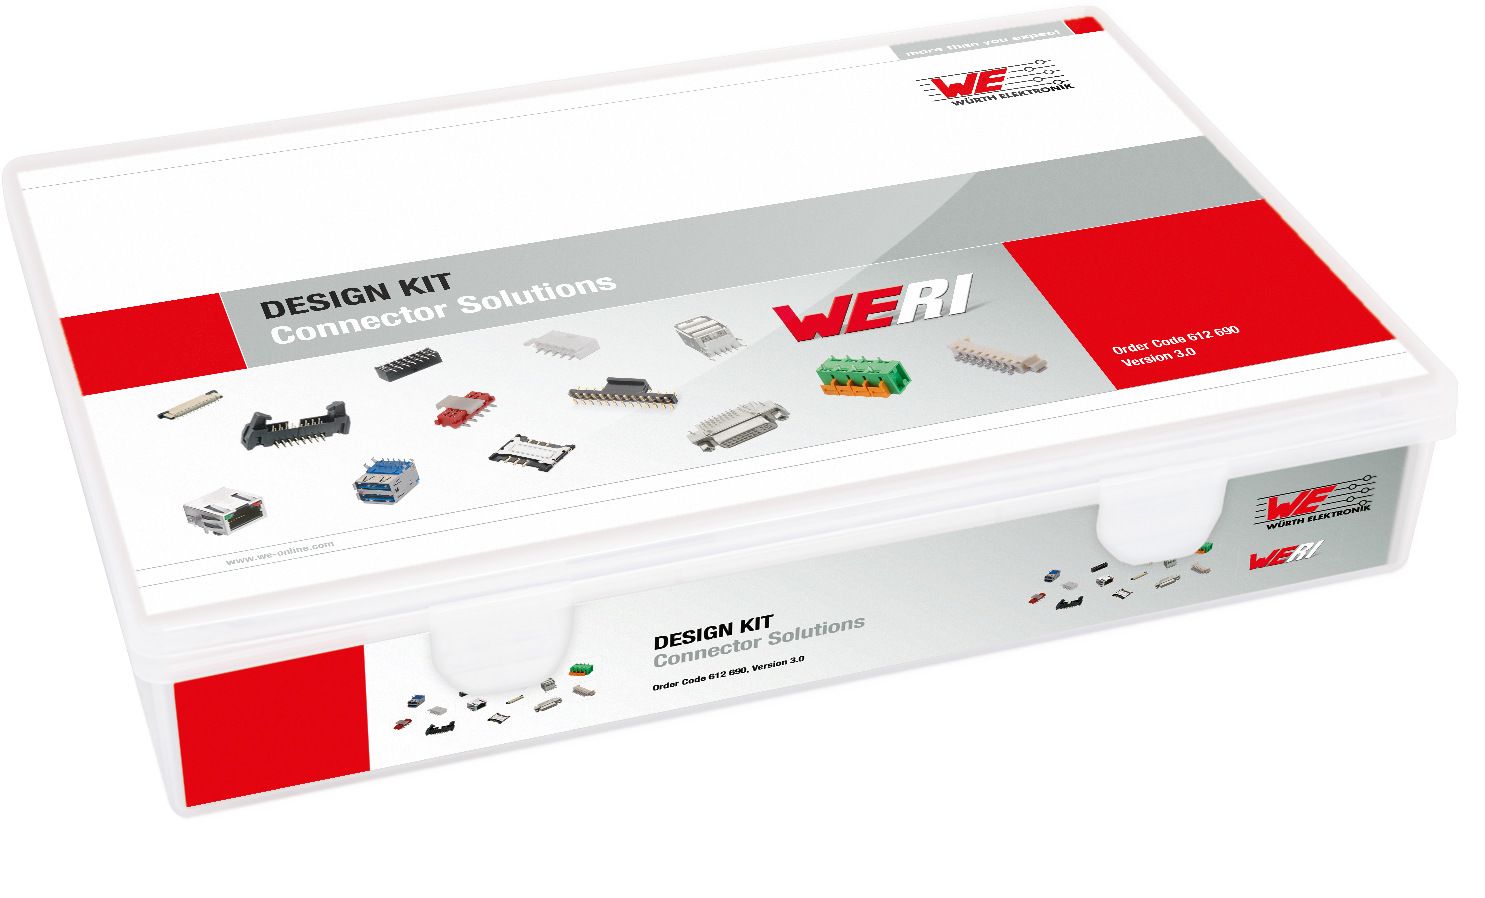 Connector Kit Containing Box Headers, Flat Cables, Flat Flexible Cable, IDC Flat Cable Connectors, Micro Power